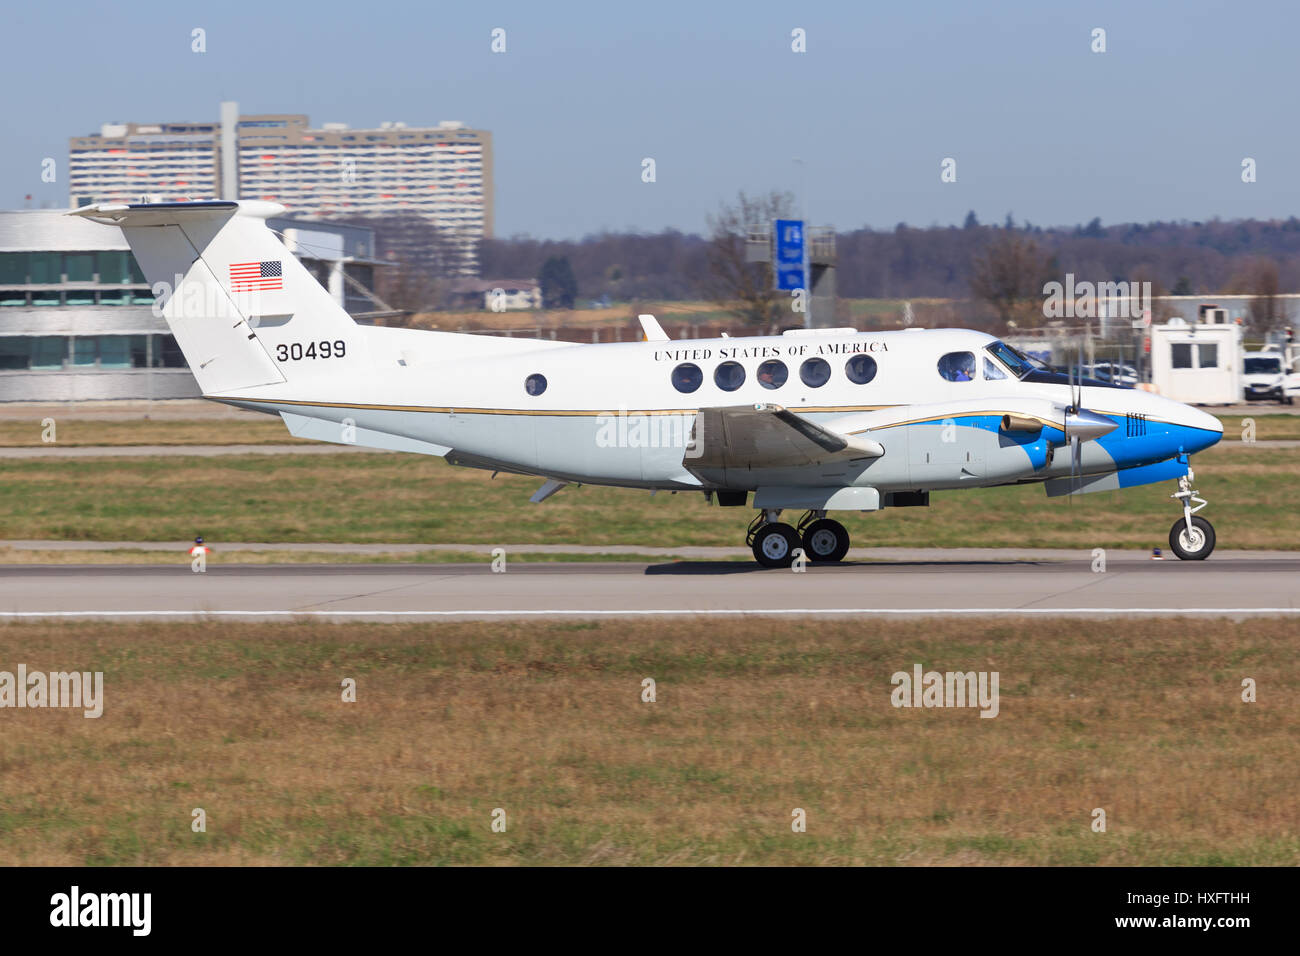 Stuttgart/Germany March 13, 2017: PC 12 from USA Airforce at Stuttgart Airport. Stock Photo